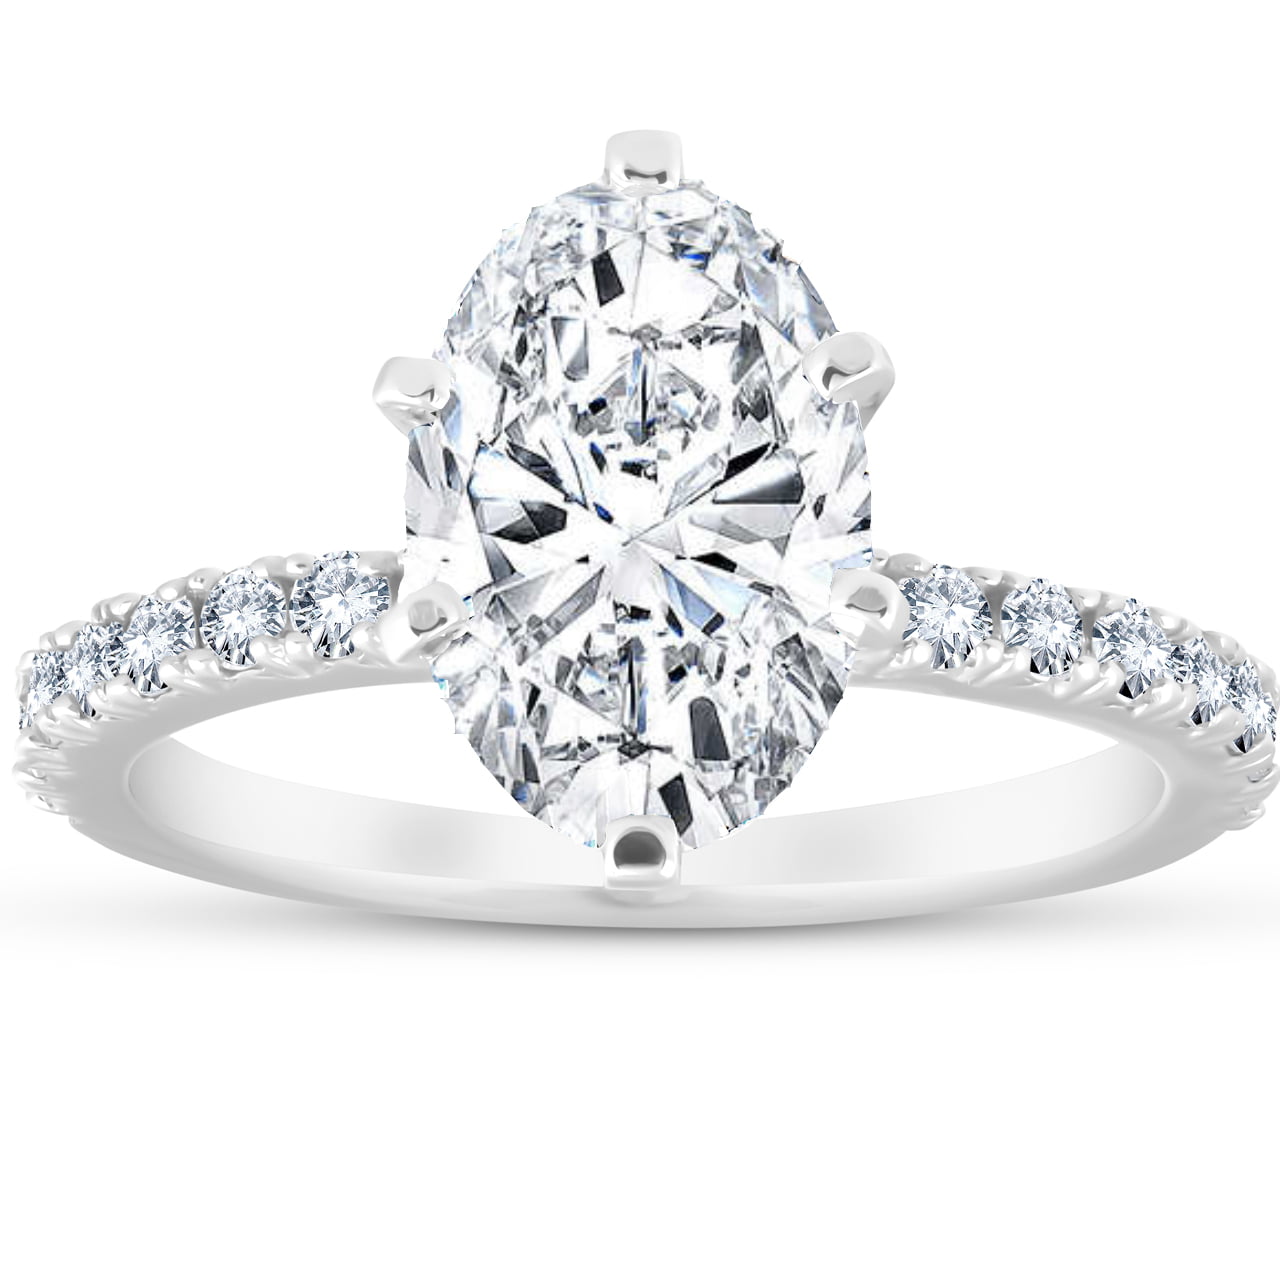 2.65ct White Oval Cut Diamond Solitaire Engagement Ring in 14K White Gold Finish 